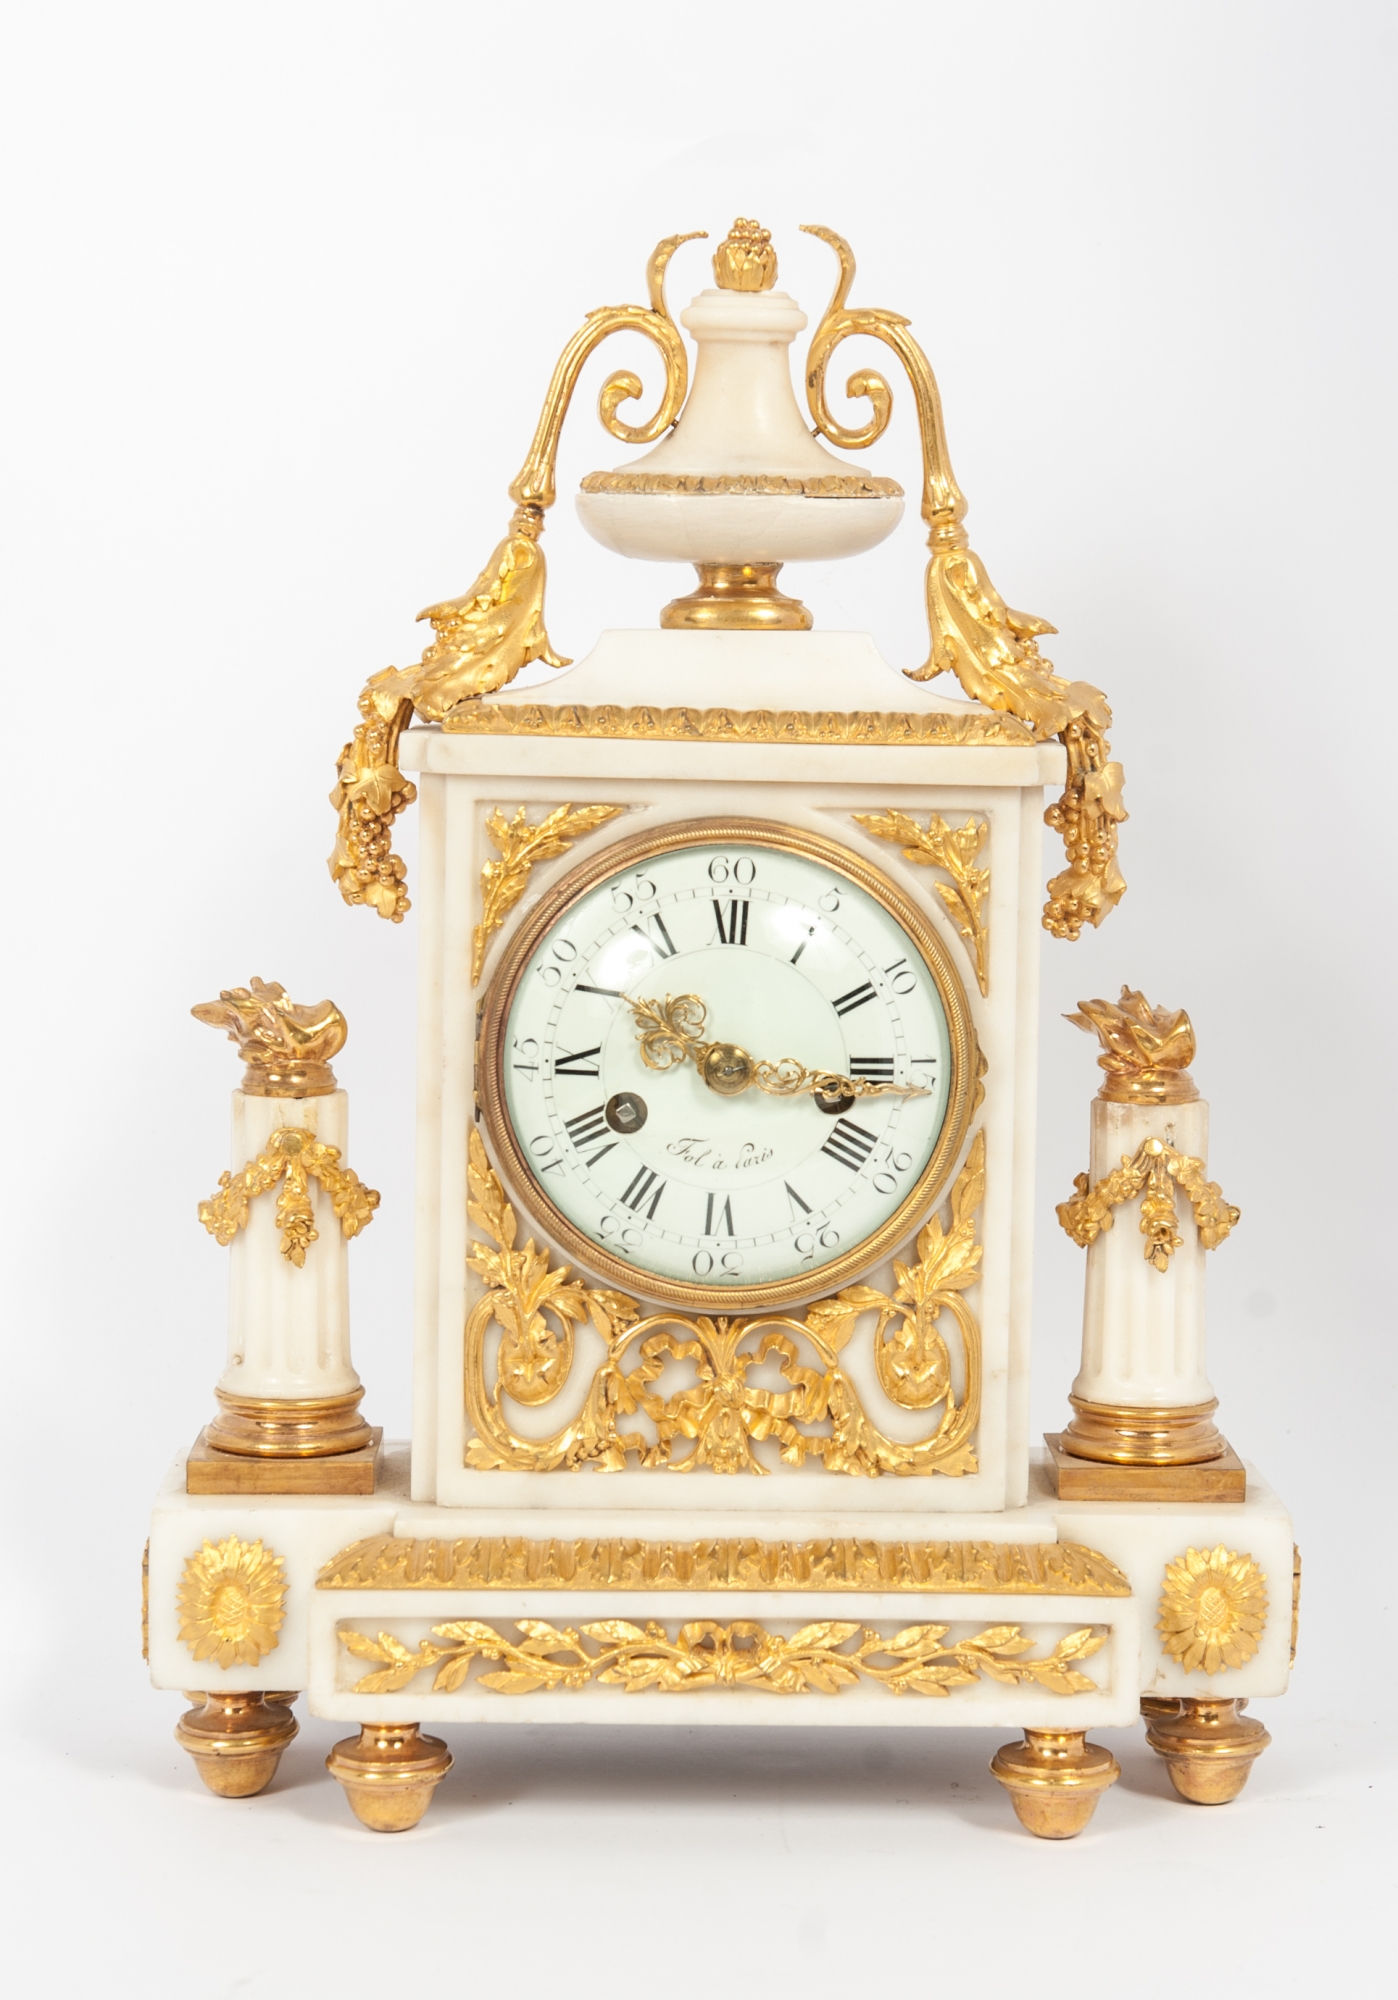 Attractive Louis Xvi White Marble Mantel Clock With Ormolu Mounts Circa 1780 Artlistings According to one source, its proper name was a jibert cathcode troisieme timepiece. ormolu mounts circa 1780 artlistings